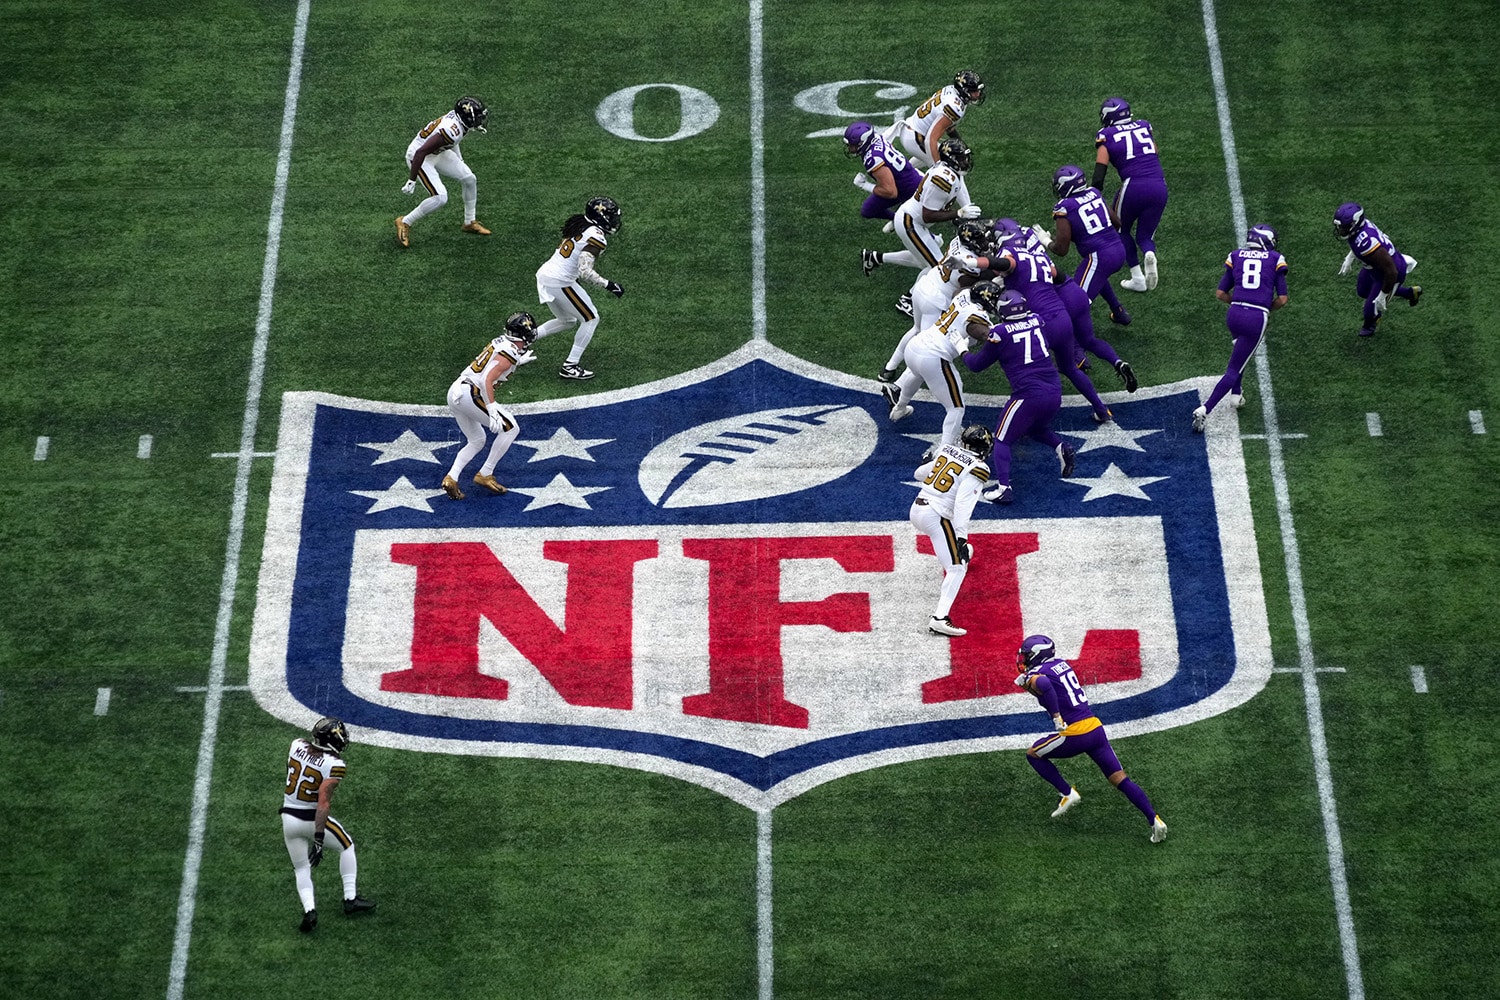 NFL Sunday Ticket expands reach to colleges